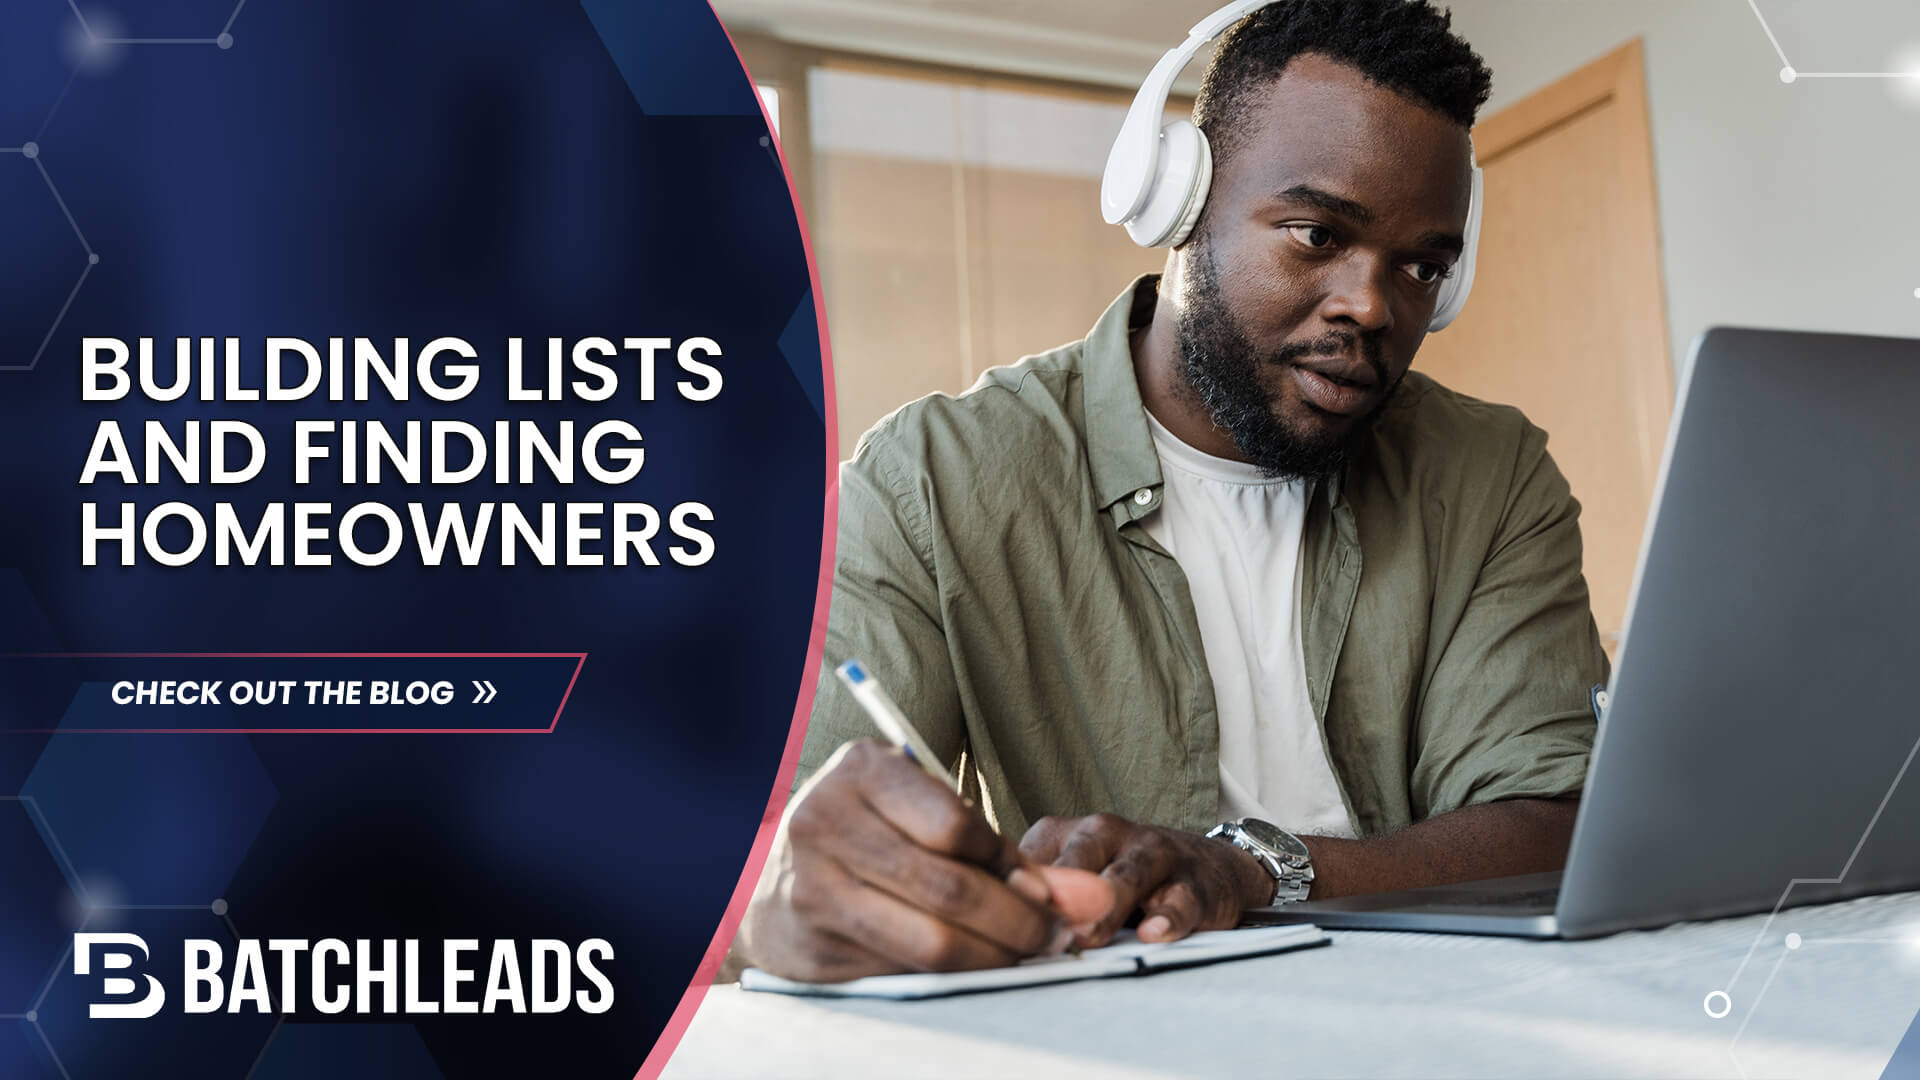 How to create home owners list using skip tracing